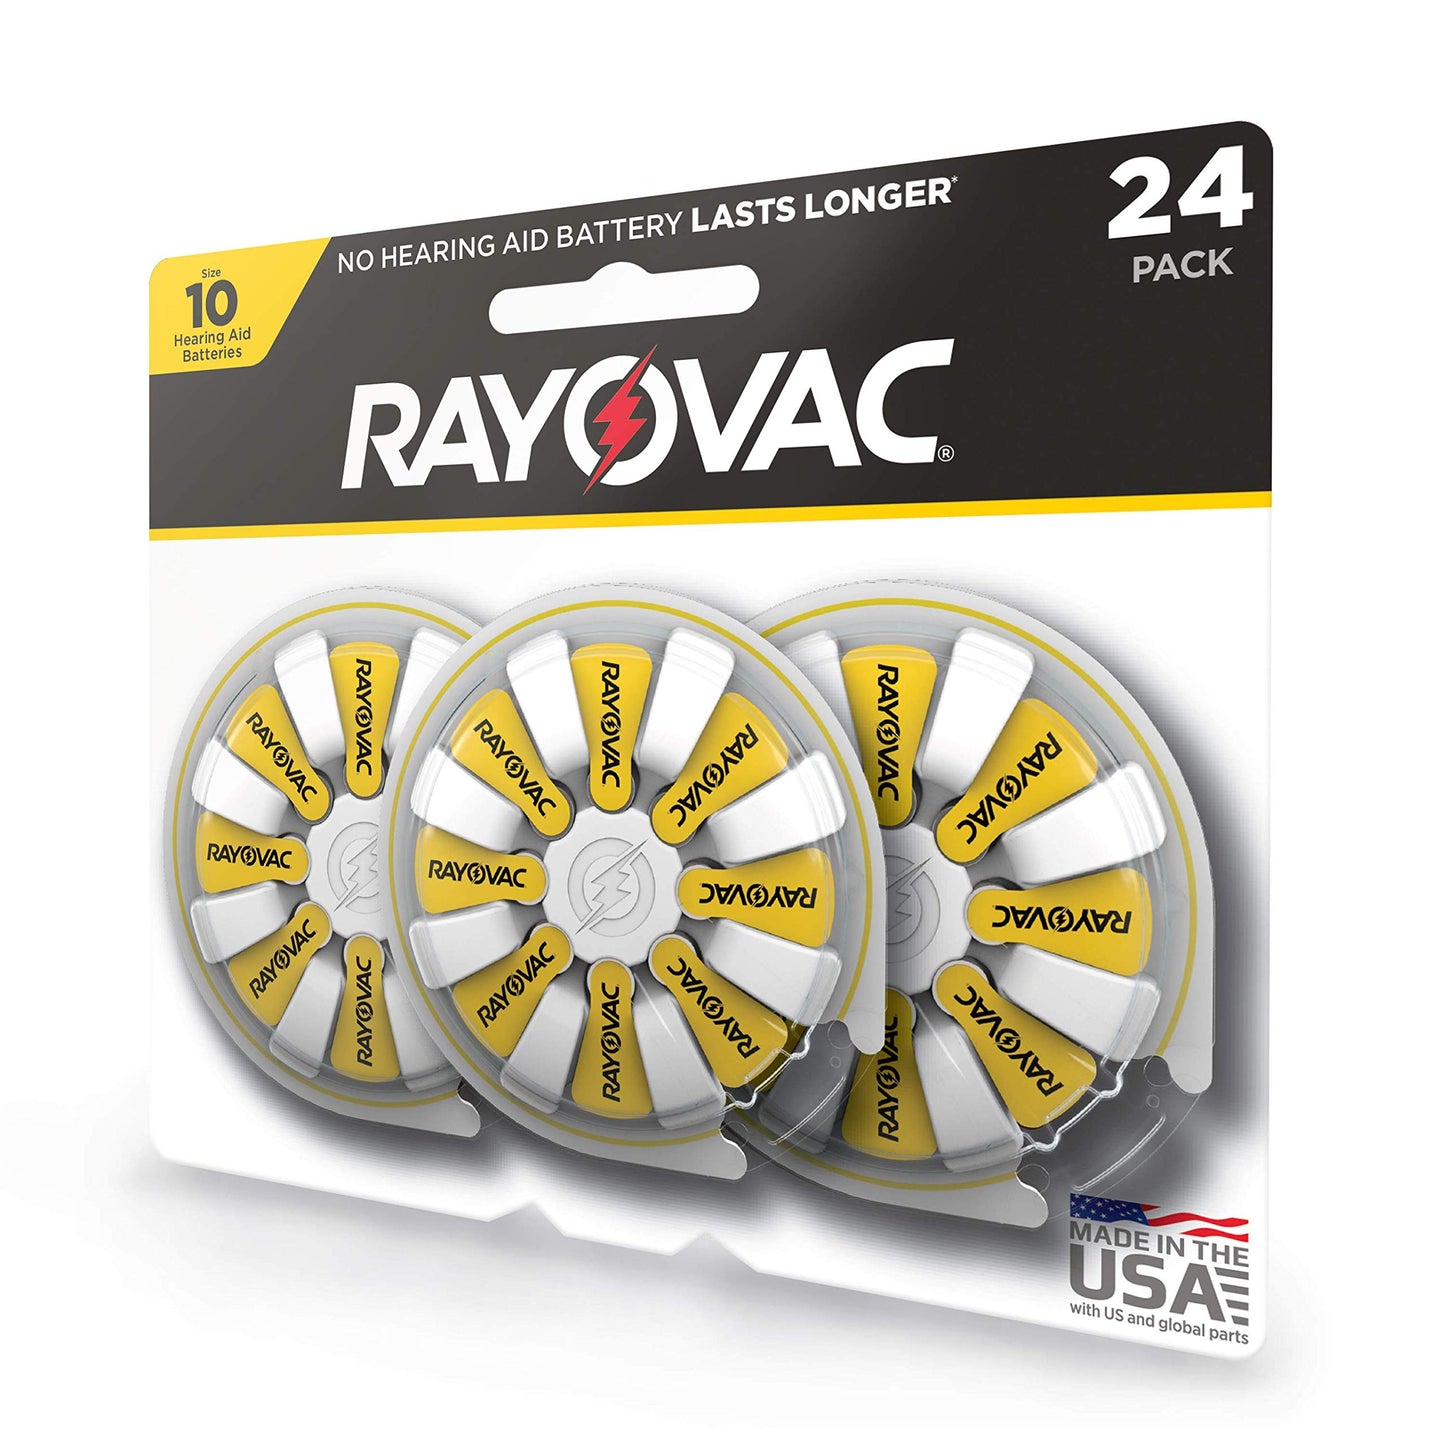 Rayovac Size 10 Hearing Aid Batteries (24 Pack), Size 10 Batteries